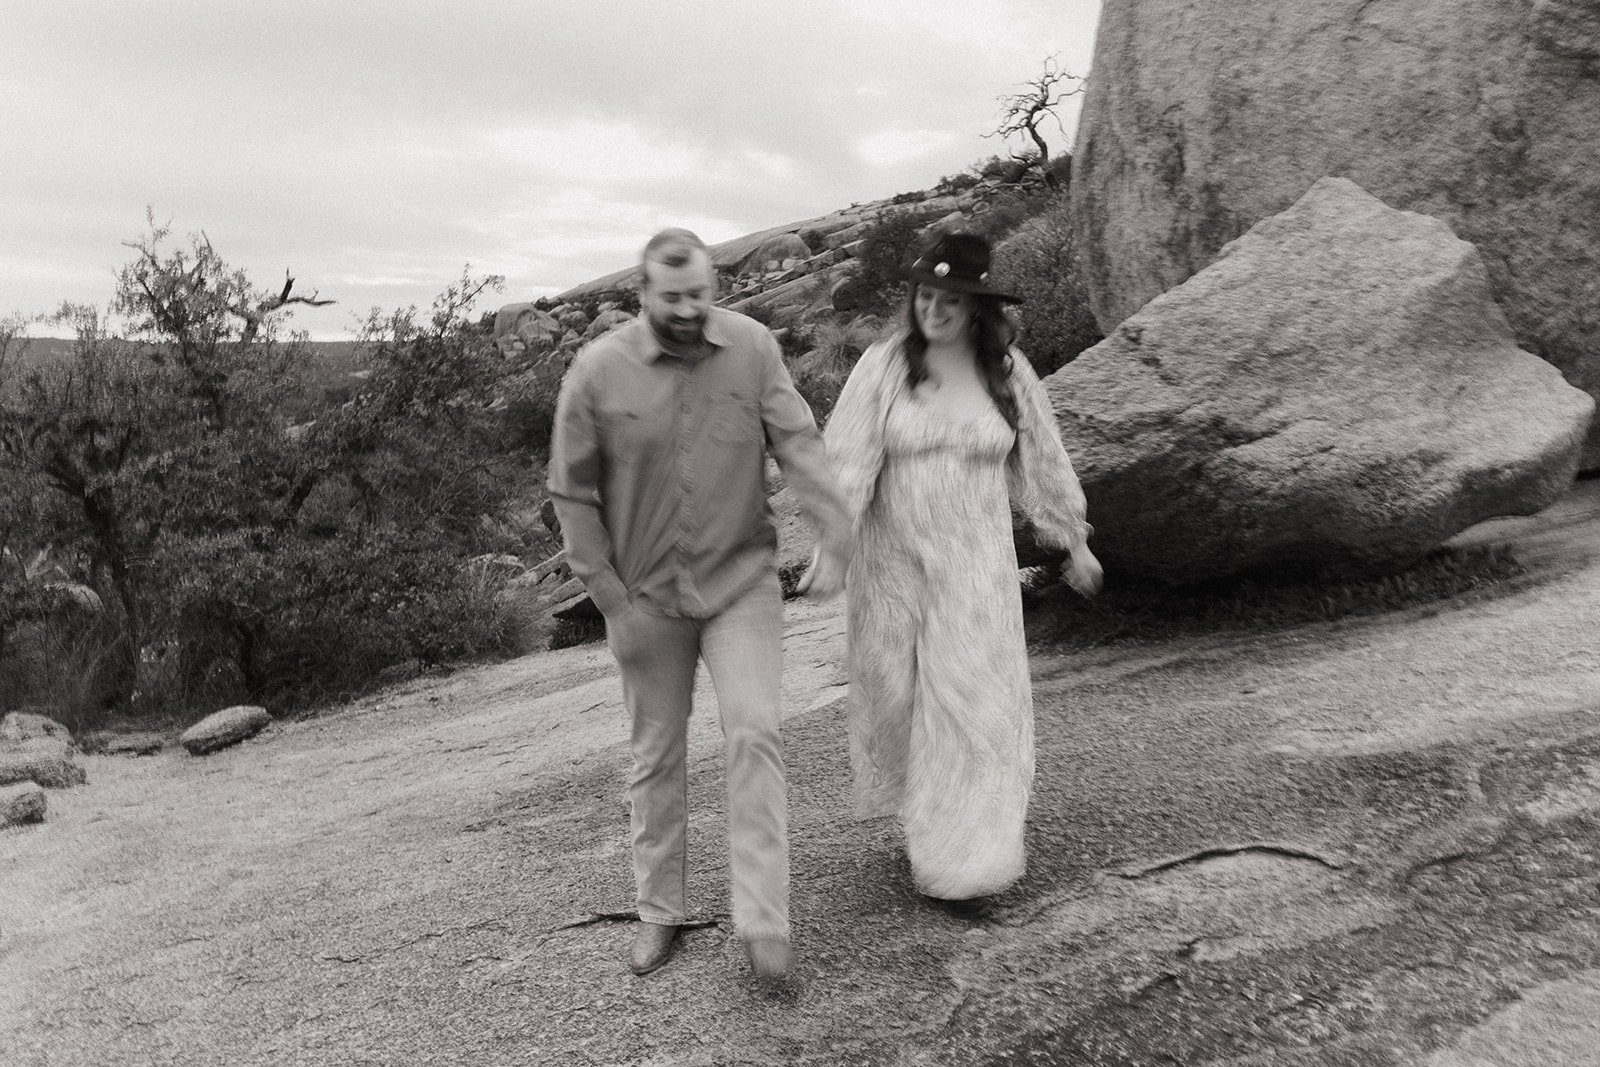 A gorgeous blurry action shot of the couple traversing the rock hand in hand